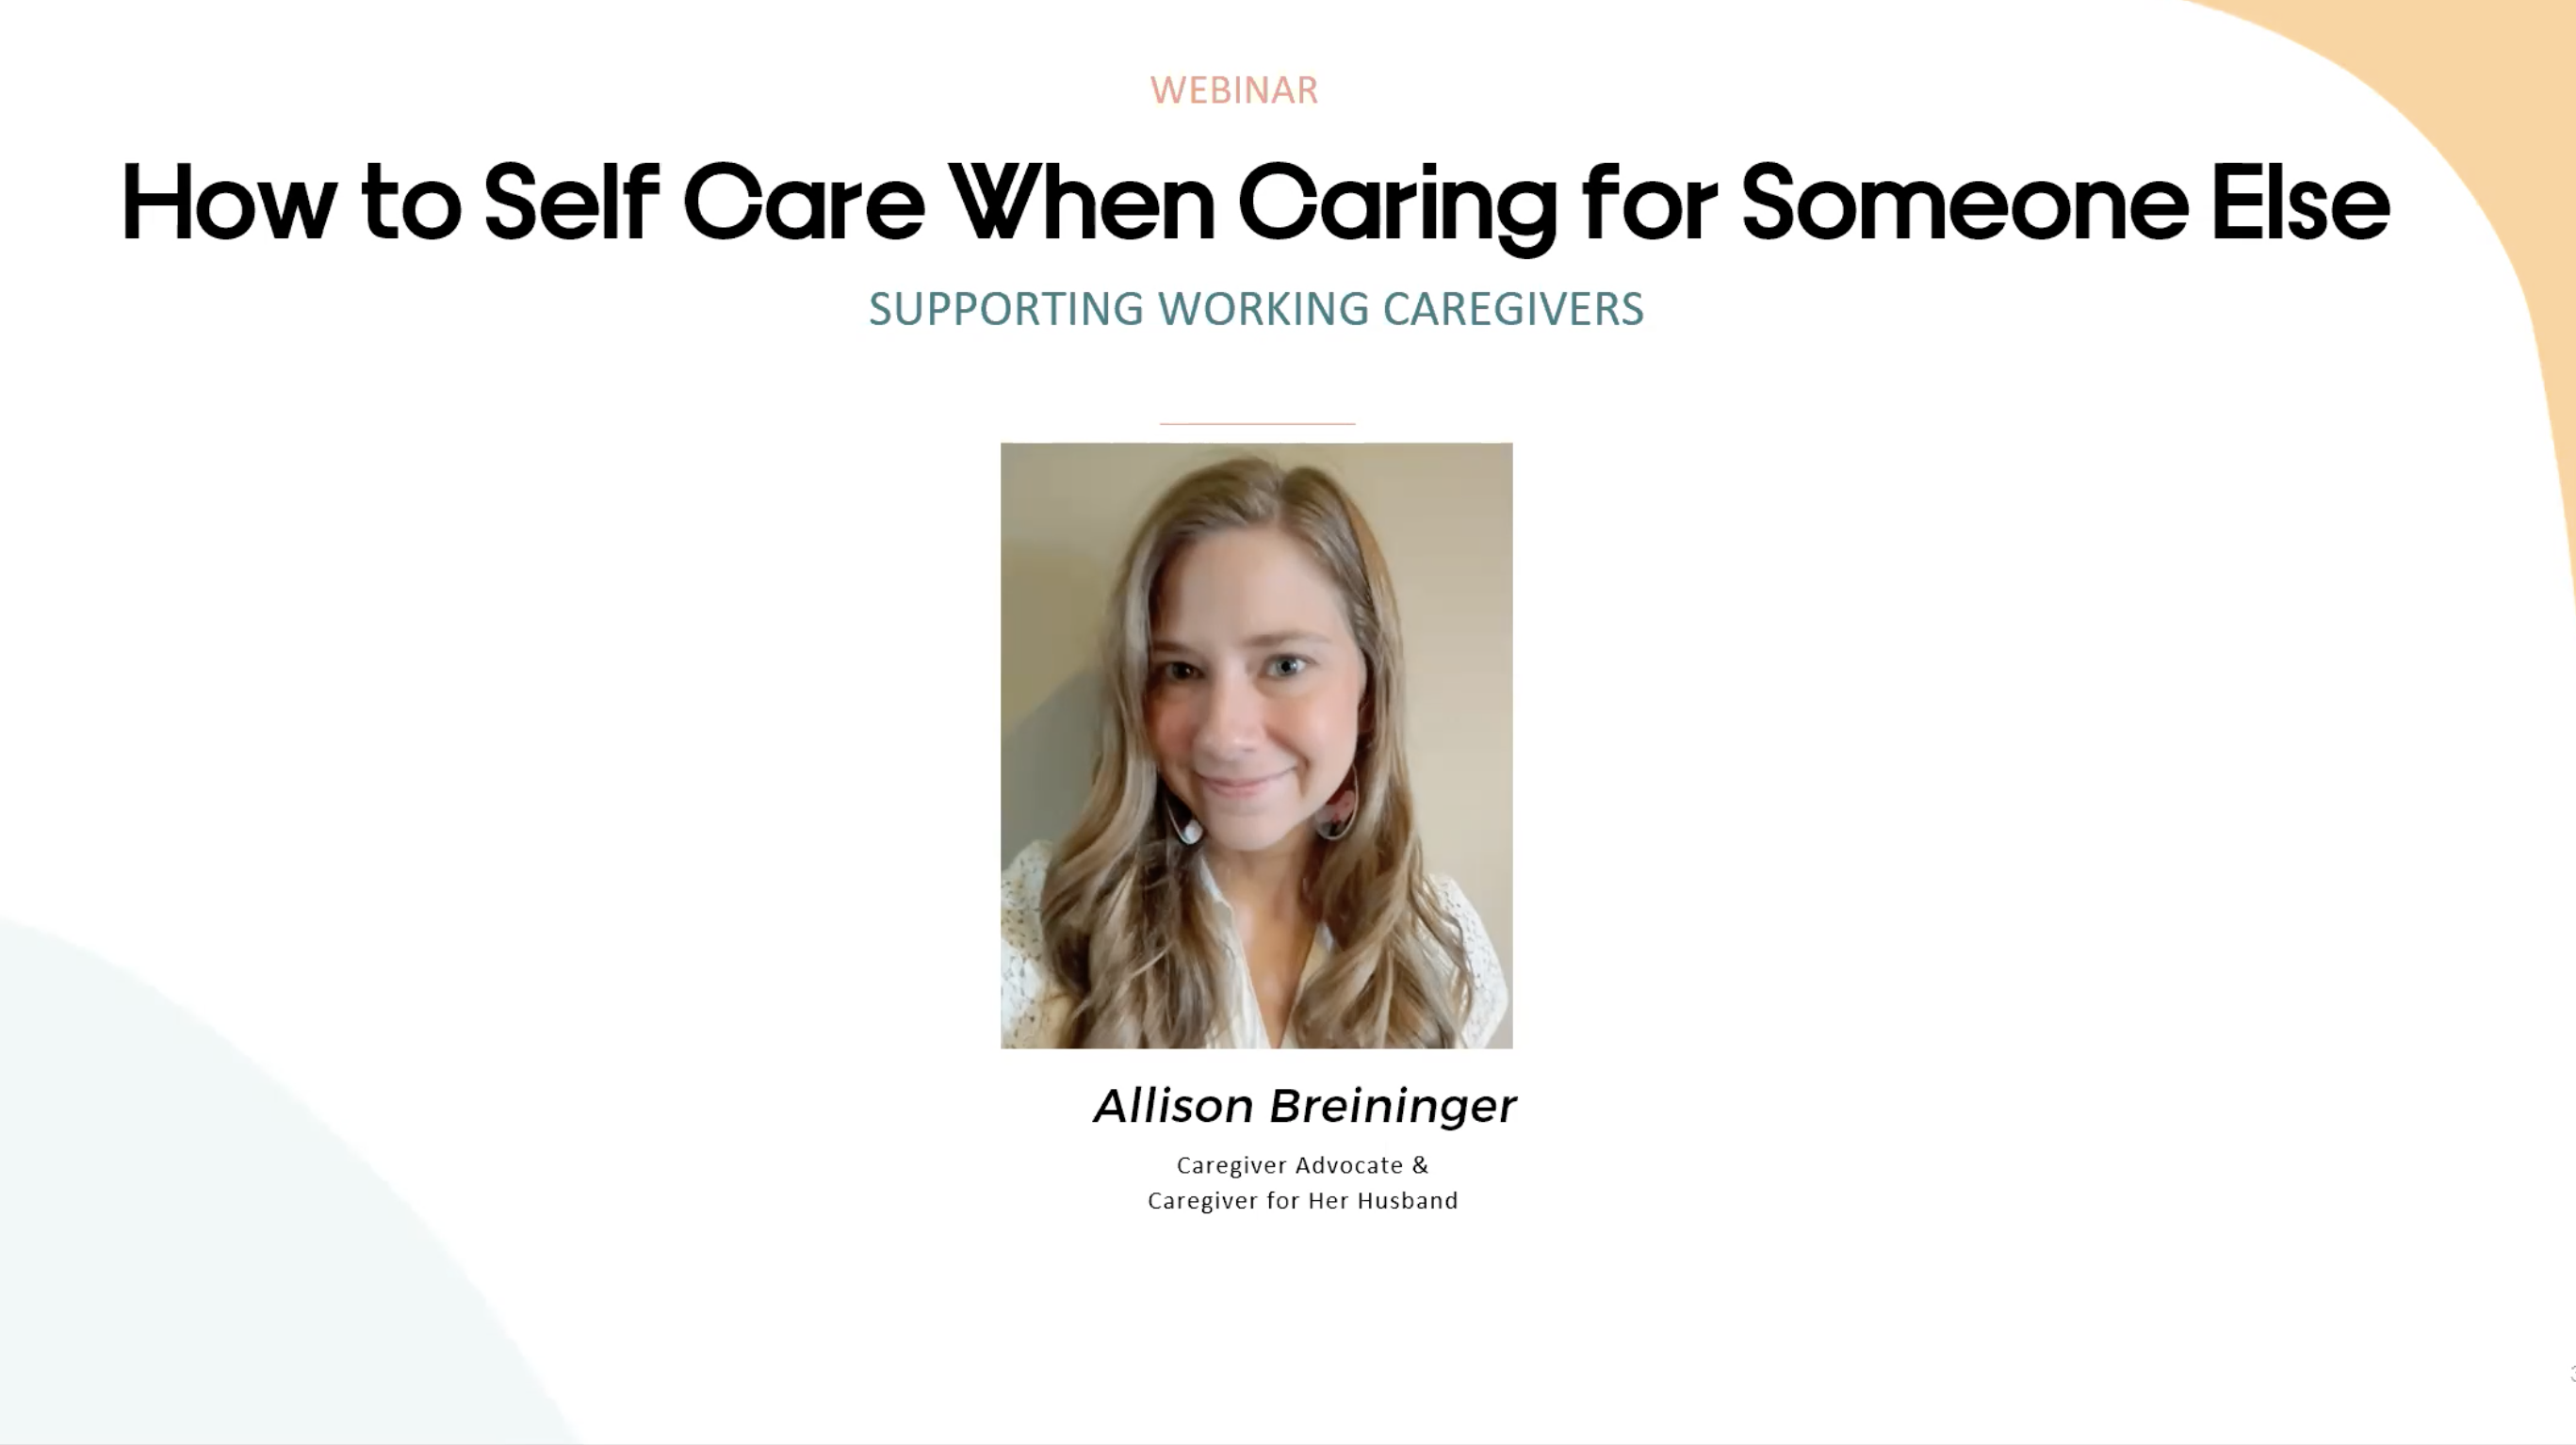 Watch: How to Self Care When Caring for Someone Else